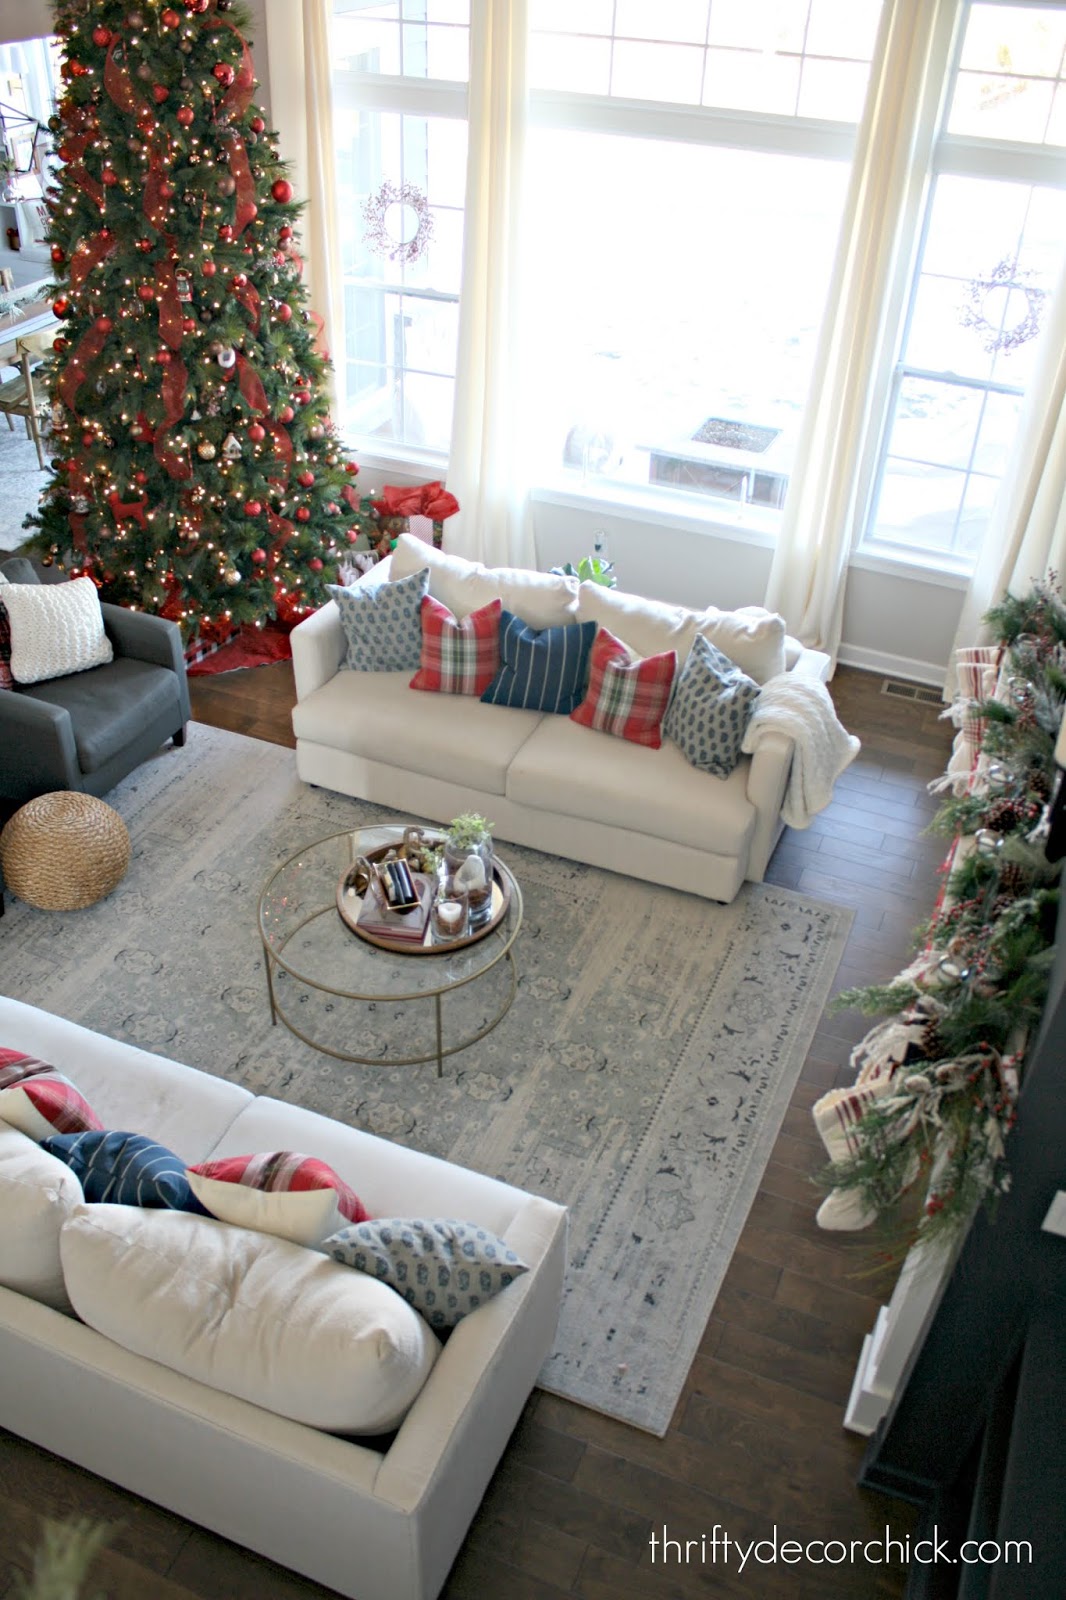 Two story great room with 12 foot tree